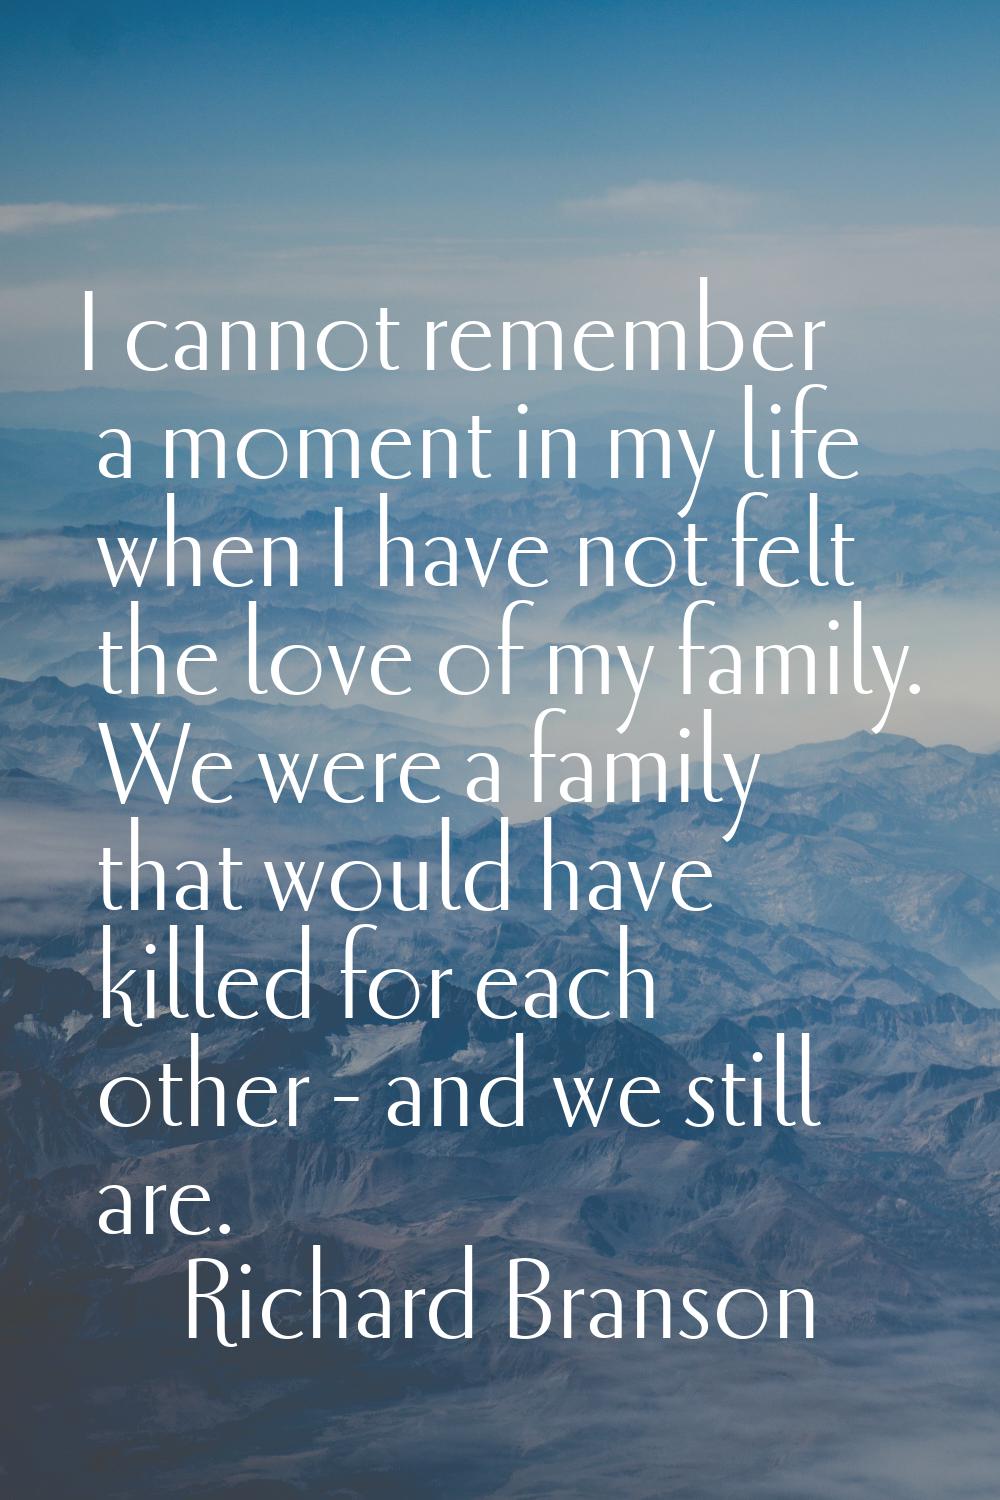 I cannot remember a moment in my life when I have not felt the love of my family. We were a family 